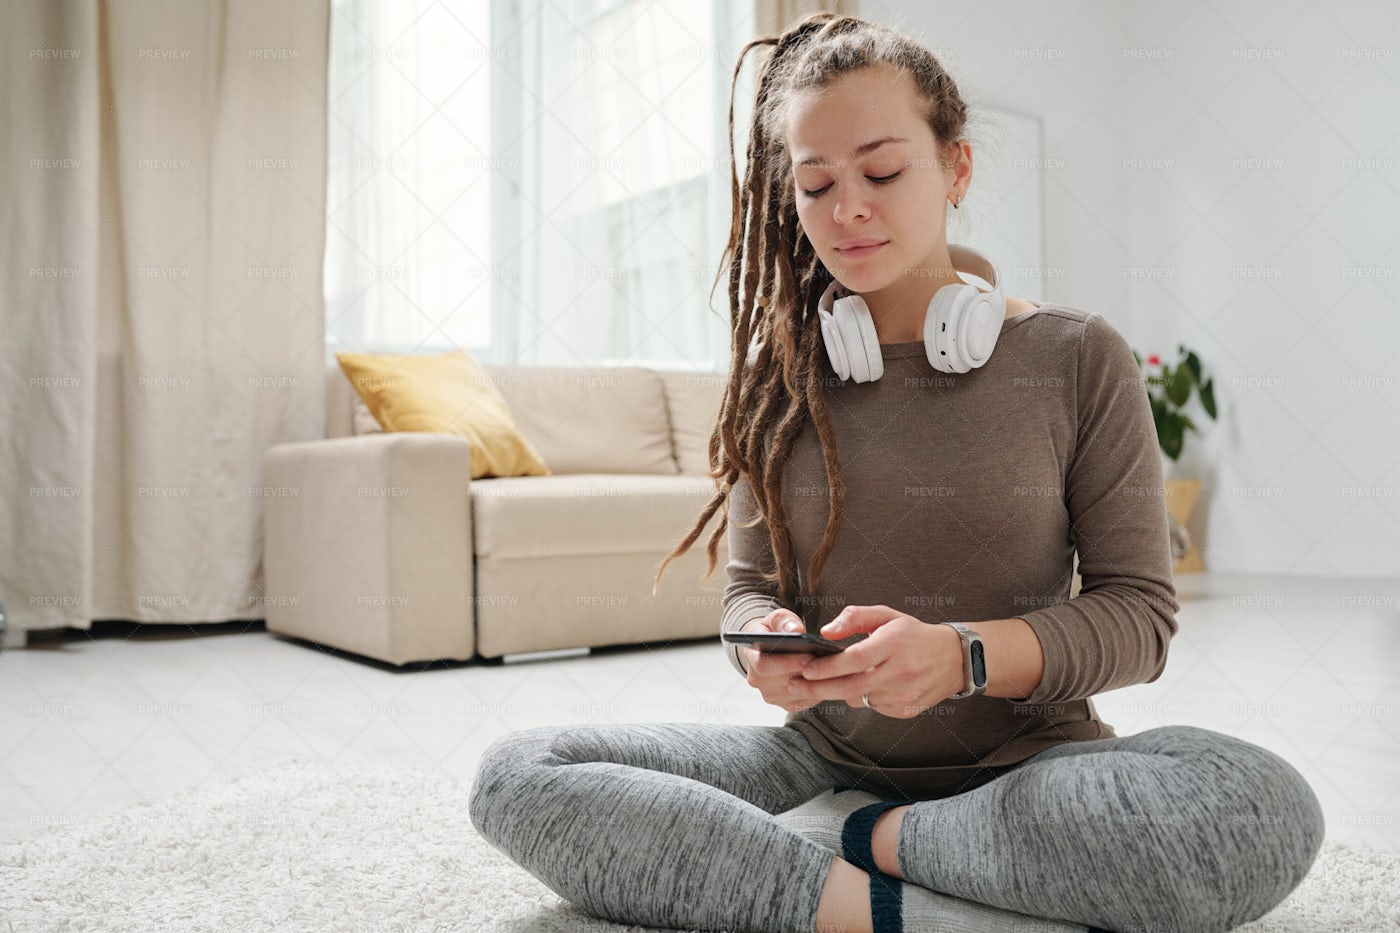 Girl With Dreadlocks Scrolling In...: Stock Photos